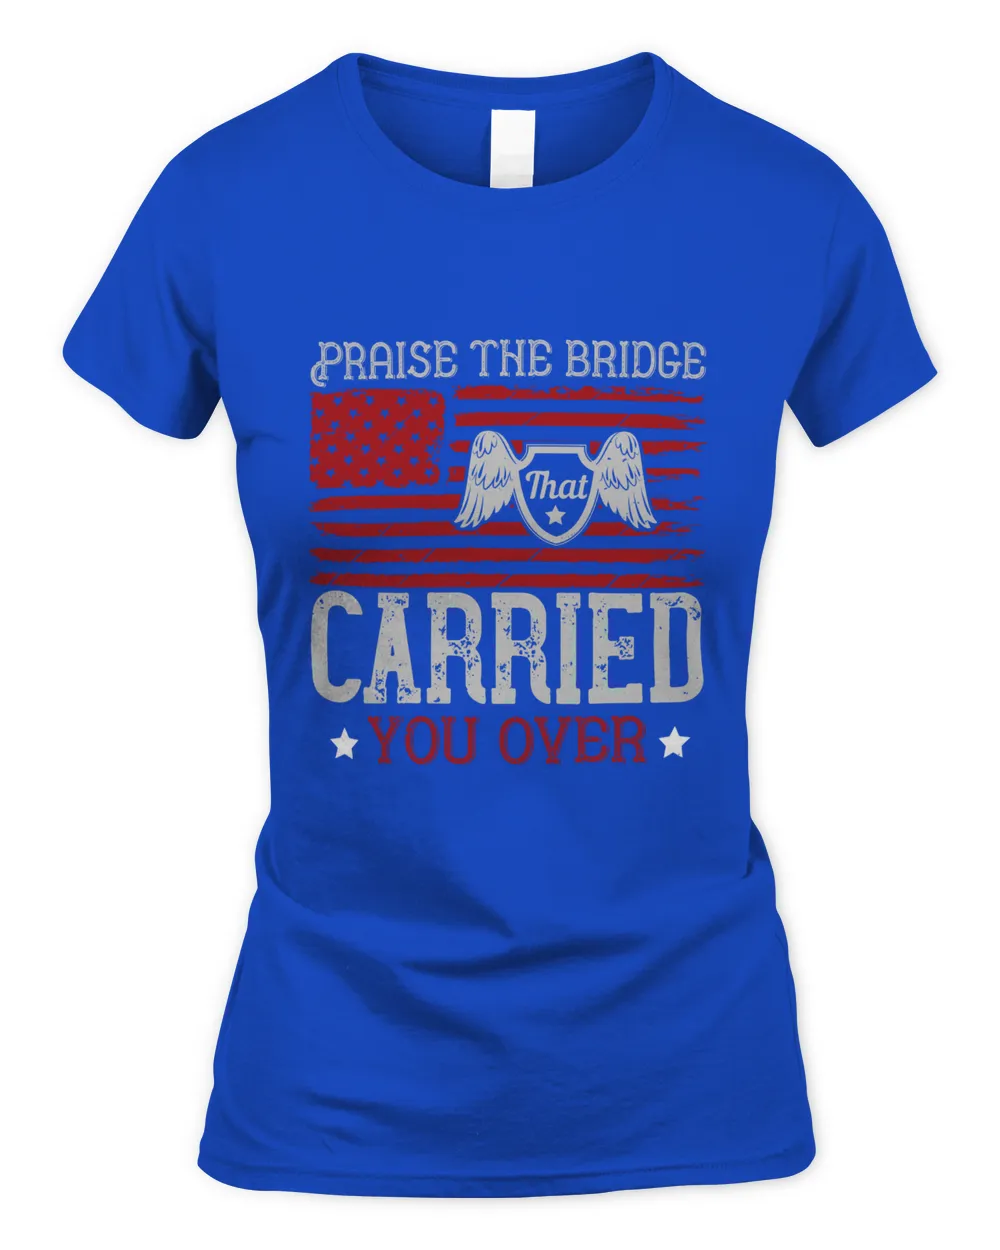 Praise the bridge that carried you over-01